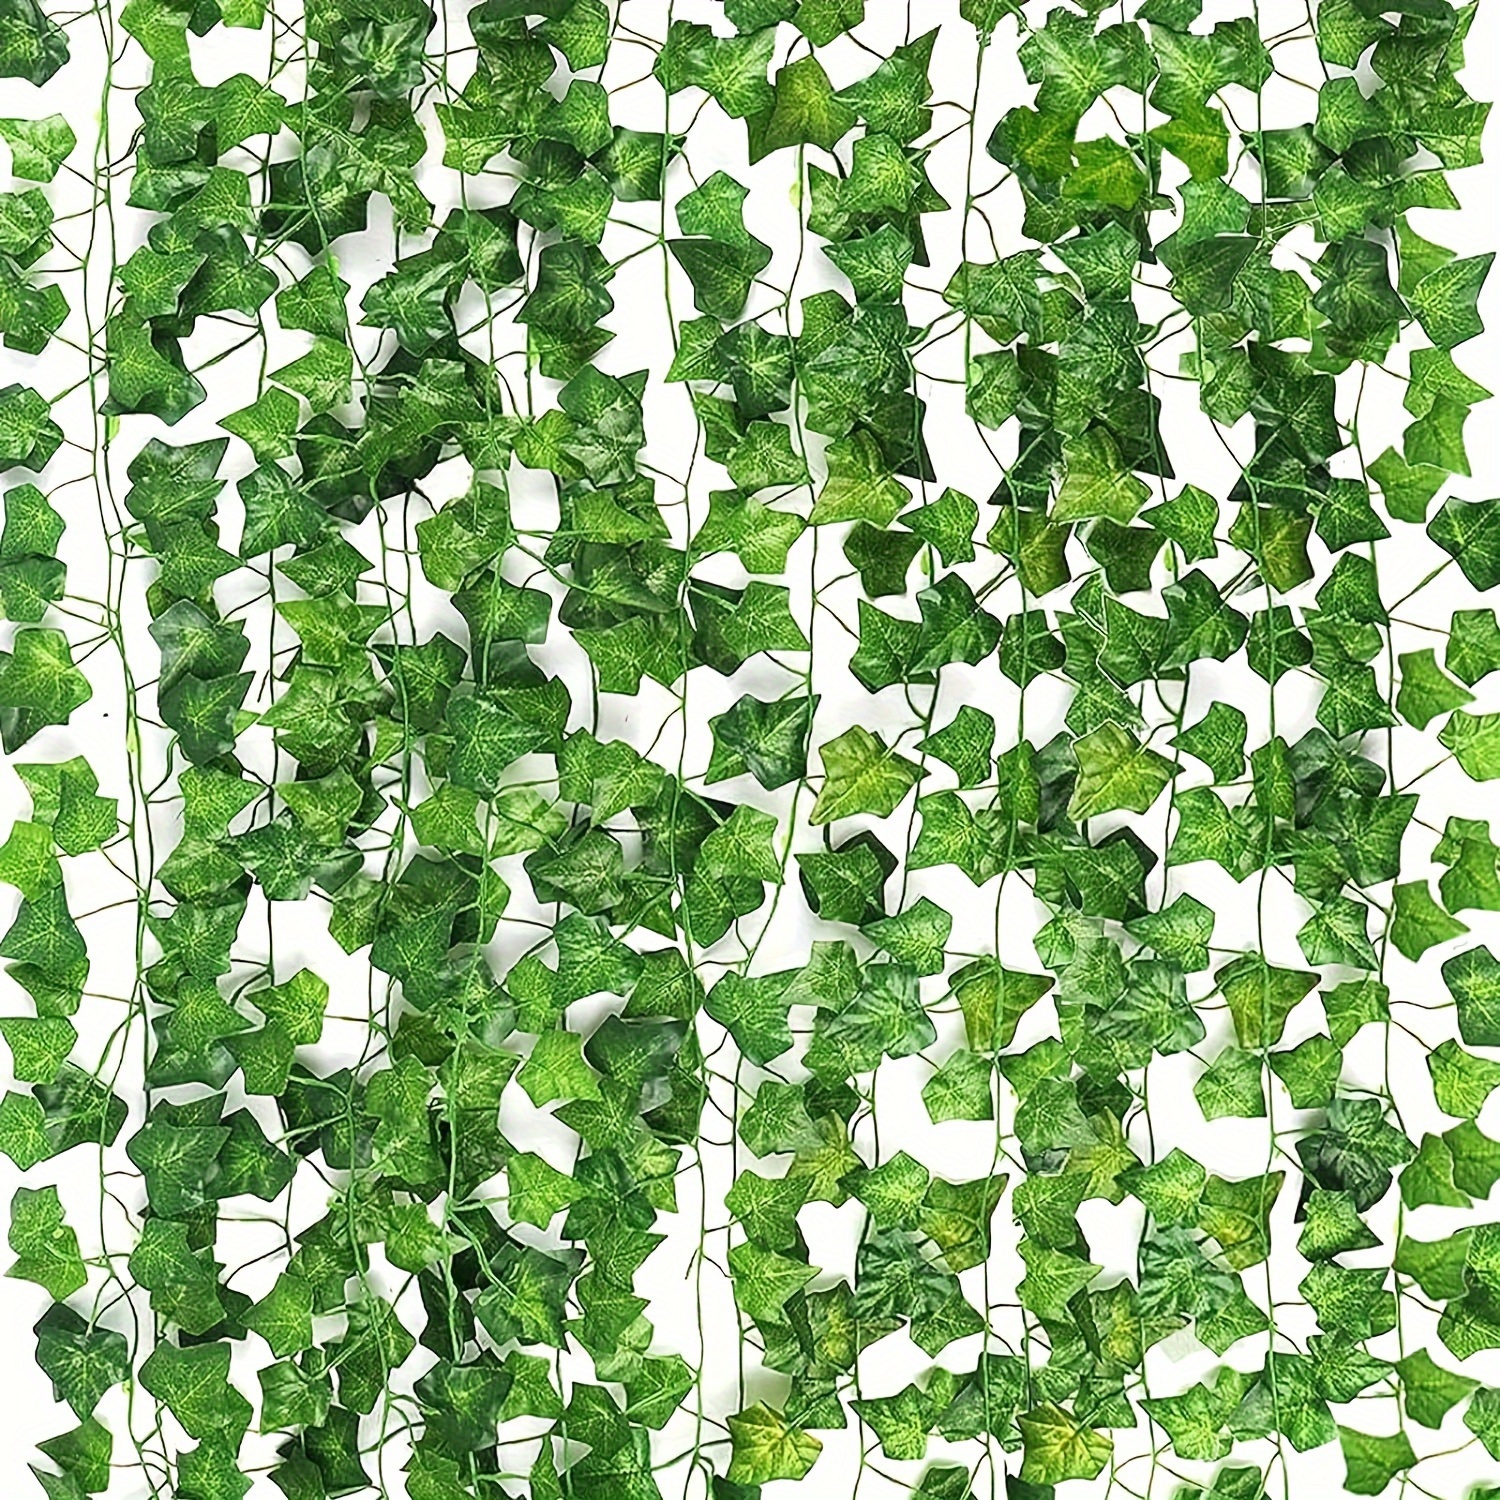 

75pcs Odorless Simulated Eucalyptus Rattan Leaf Piping Indoor Birthday Party Decoration Simulated Green Dill Leaf Vine Creeper Leaf Simulation Rattan Easter Gift